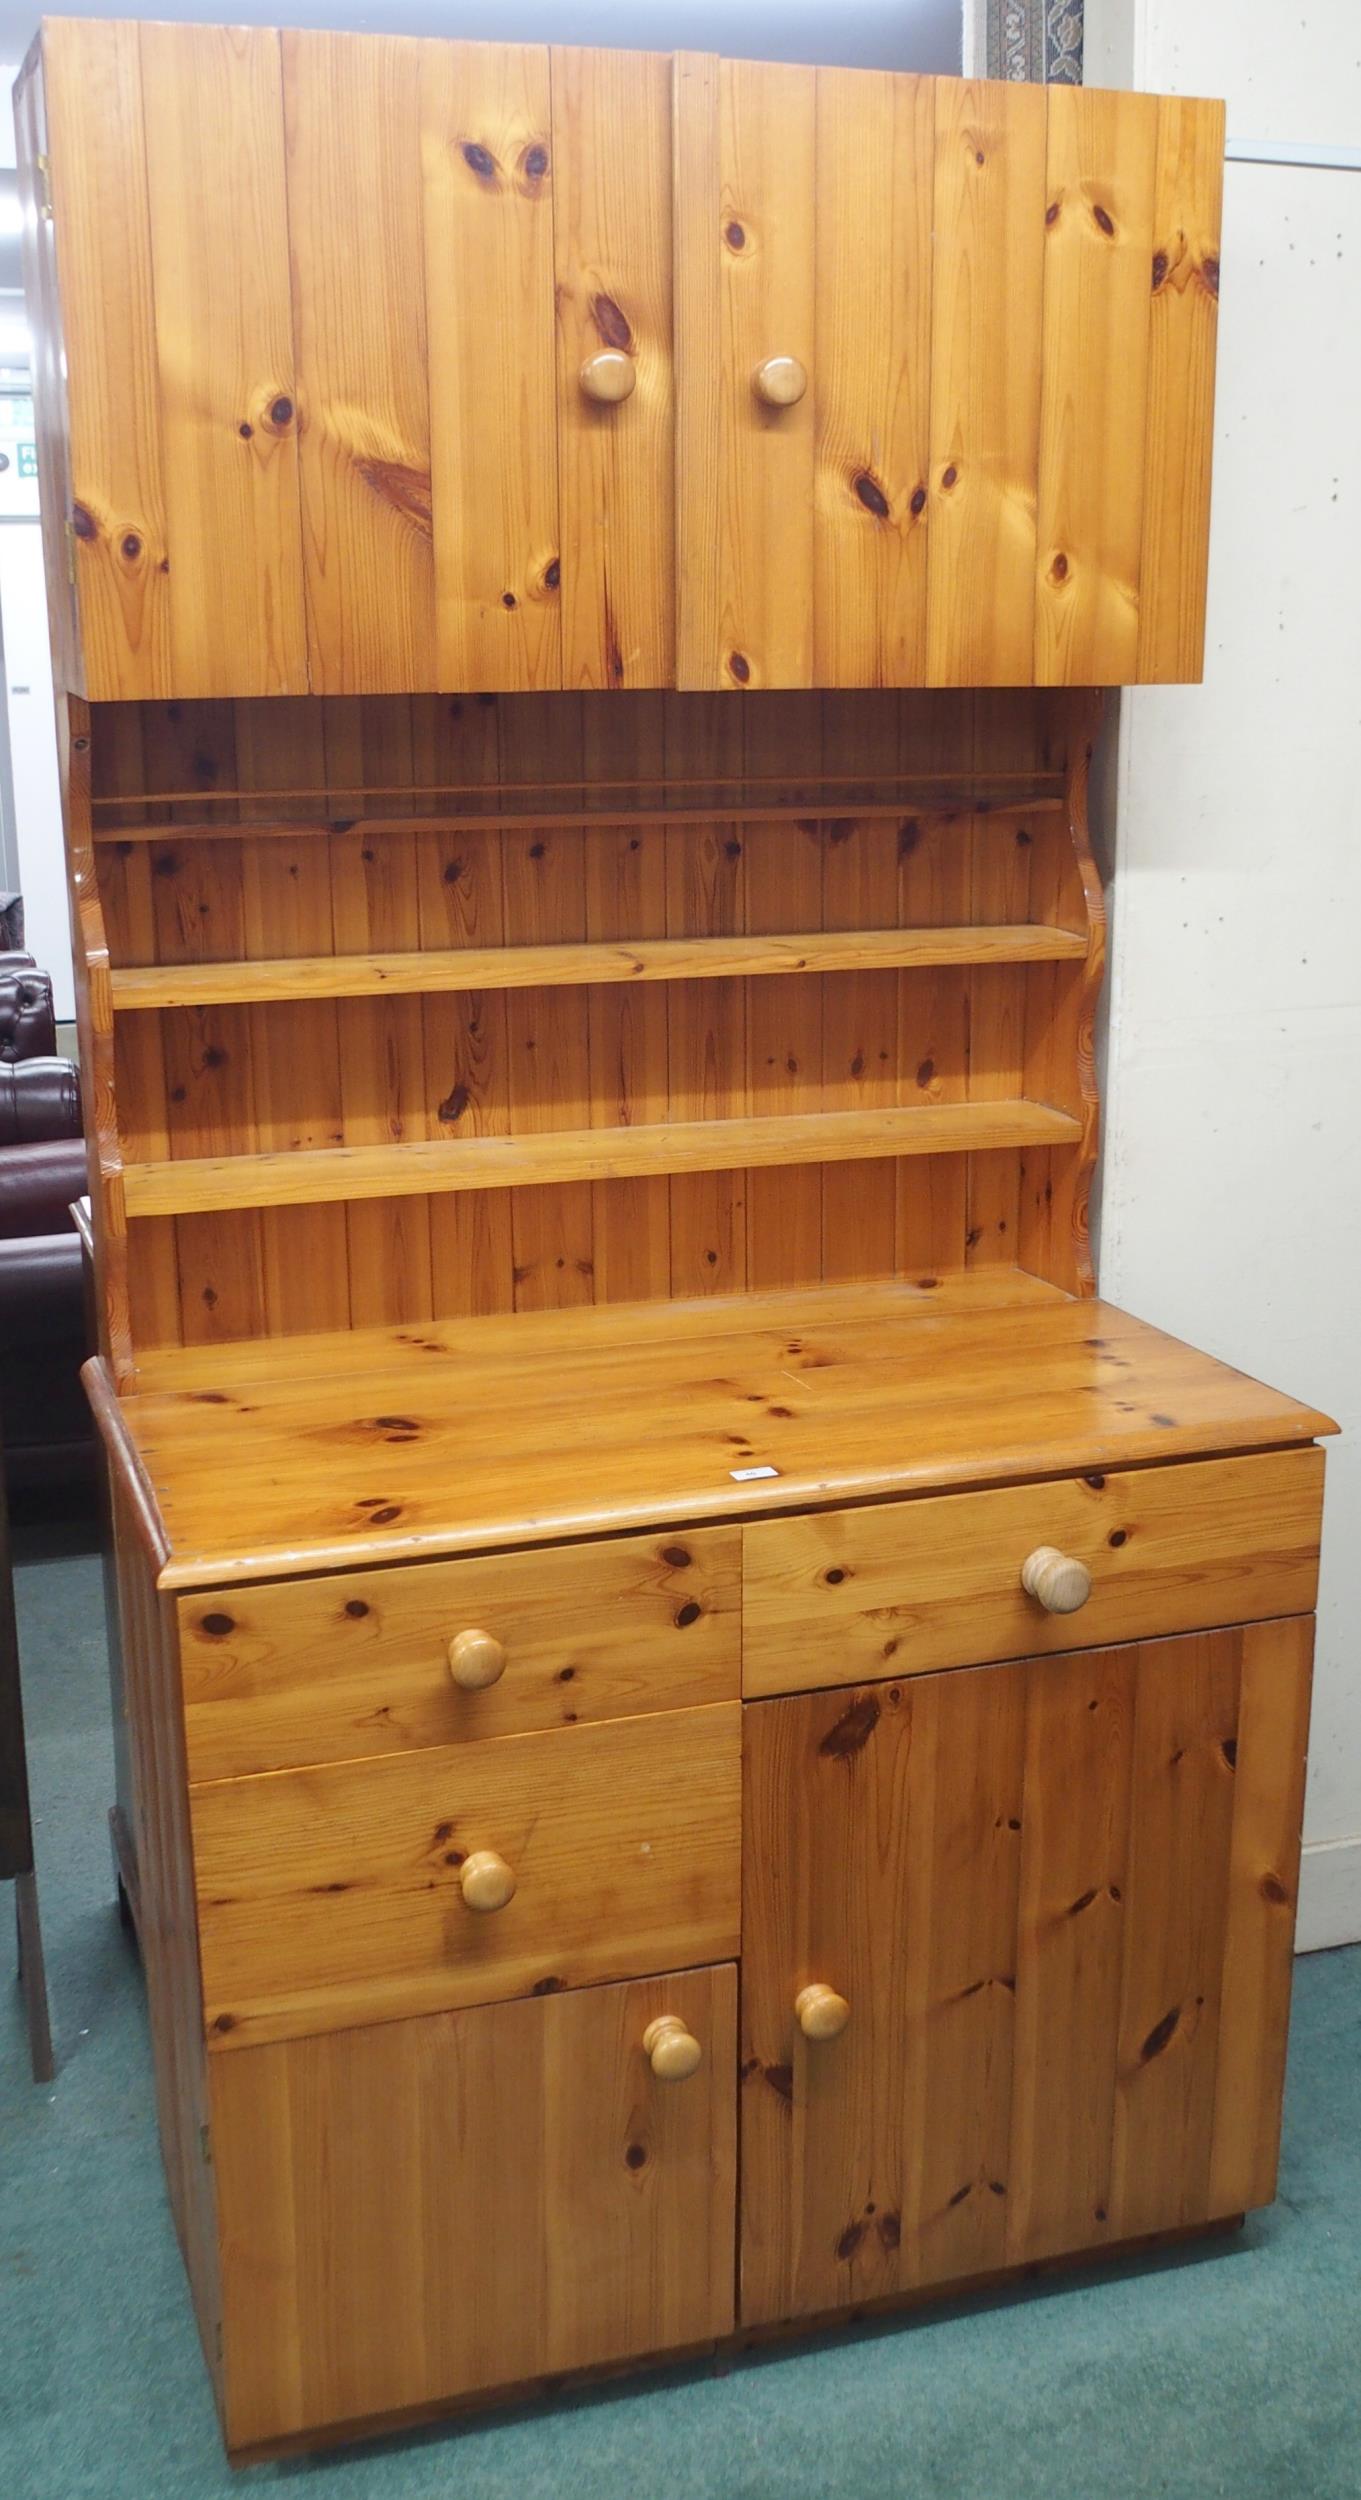 A 20th century pine estate built kitchen cabinet with pair of cabinet doors over open plate rack